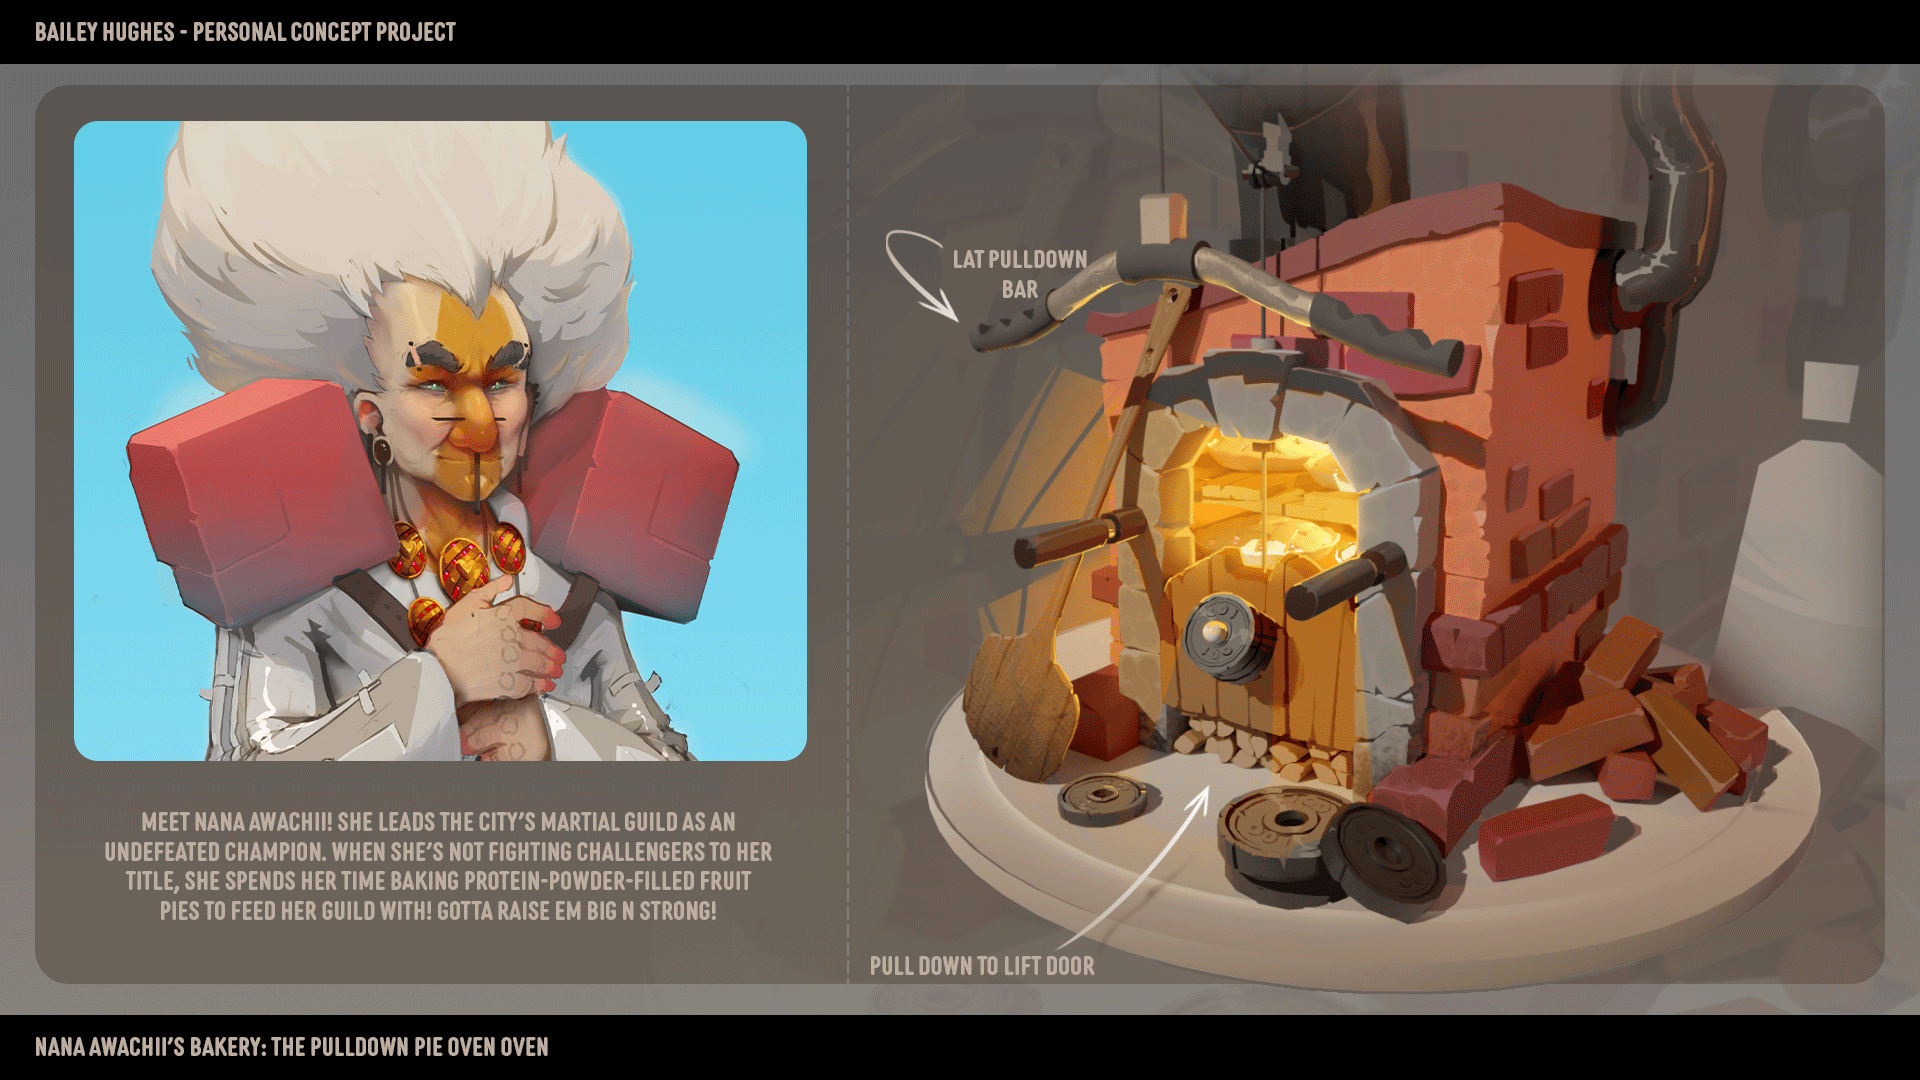 An old lady is displayed, with wild large white hair, a streak painted down her face, and giant pauldrons shaped like fists on her shoulders. Beside her is her Oven, which doubles as a Lat-Pulldown Machine!